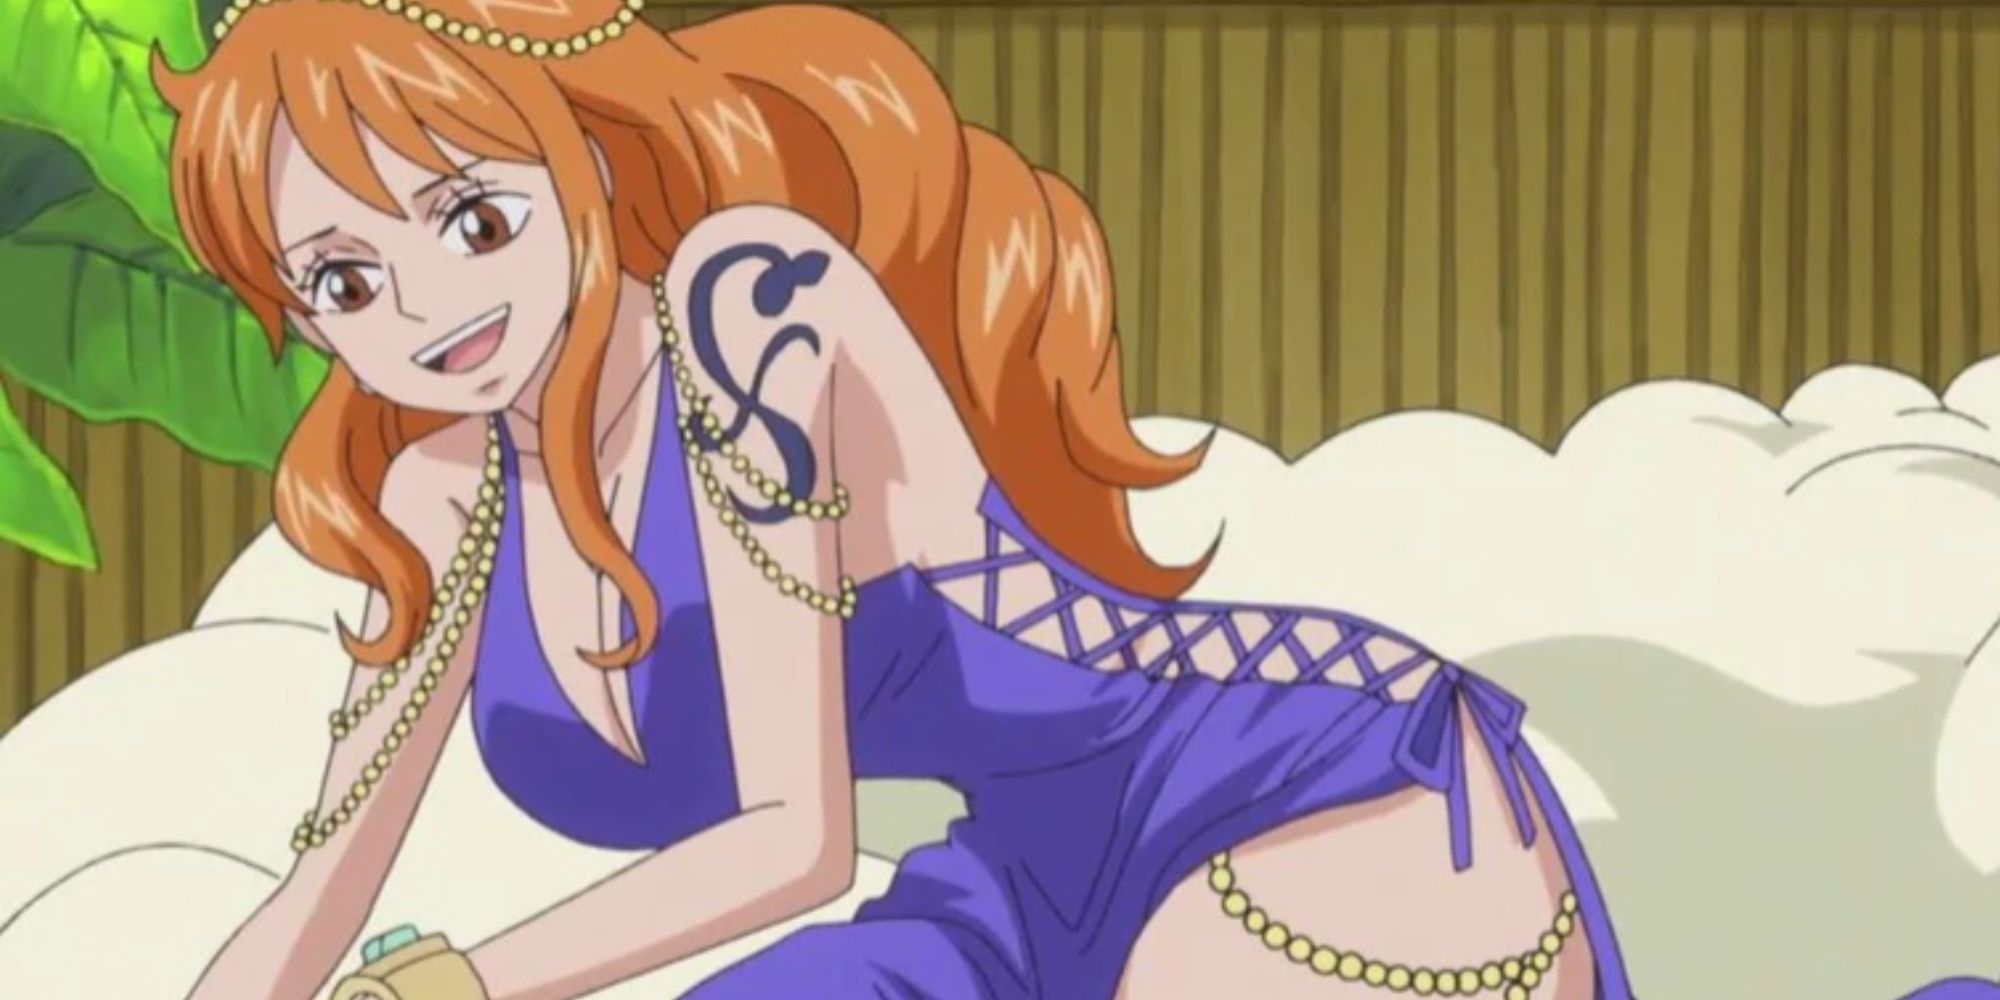 Nami donning her purple dress during the Zou arc in One Piece.